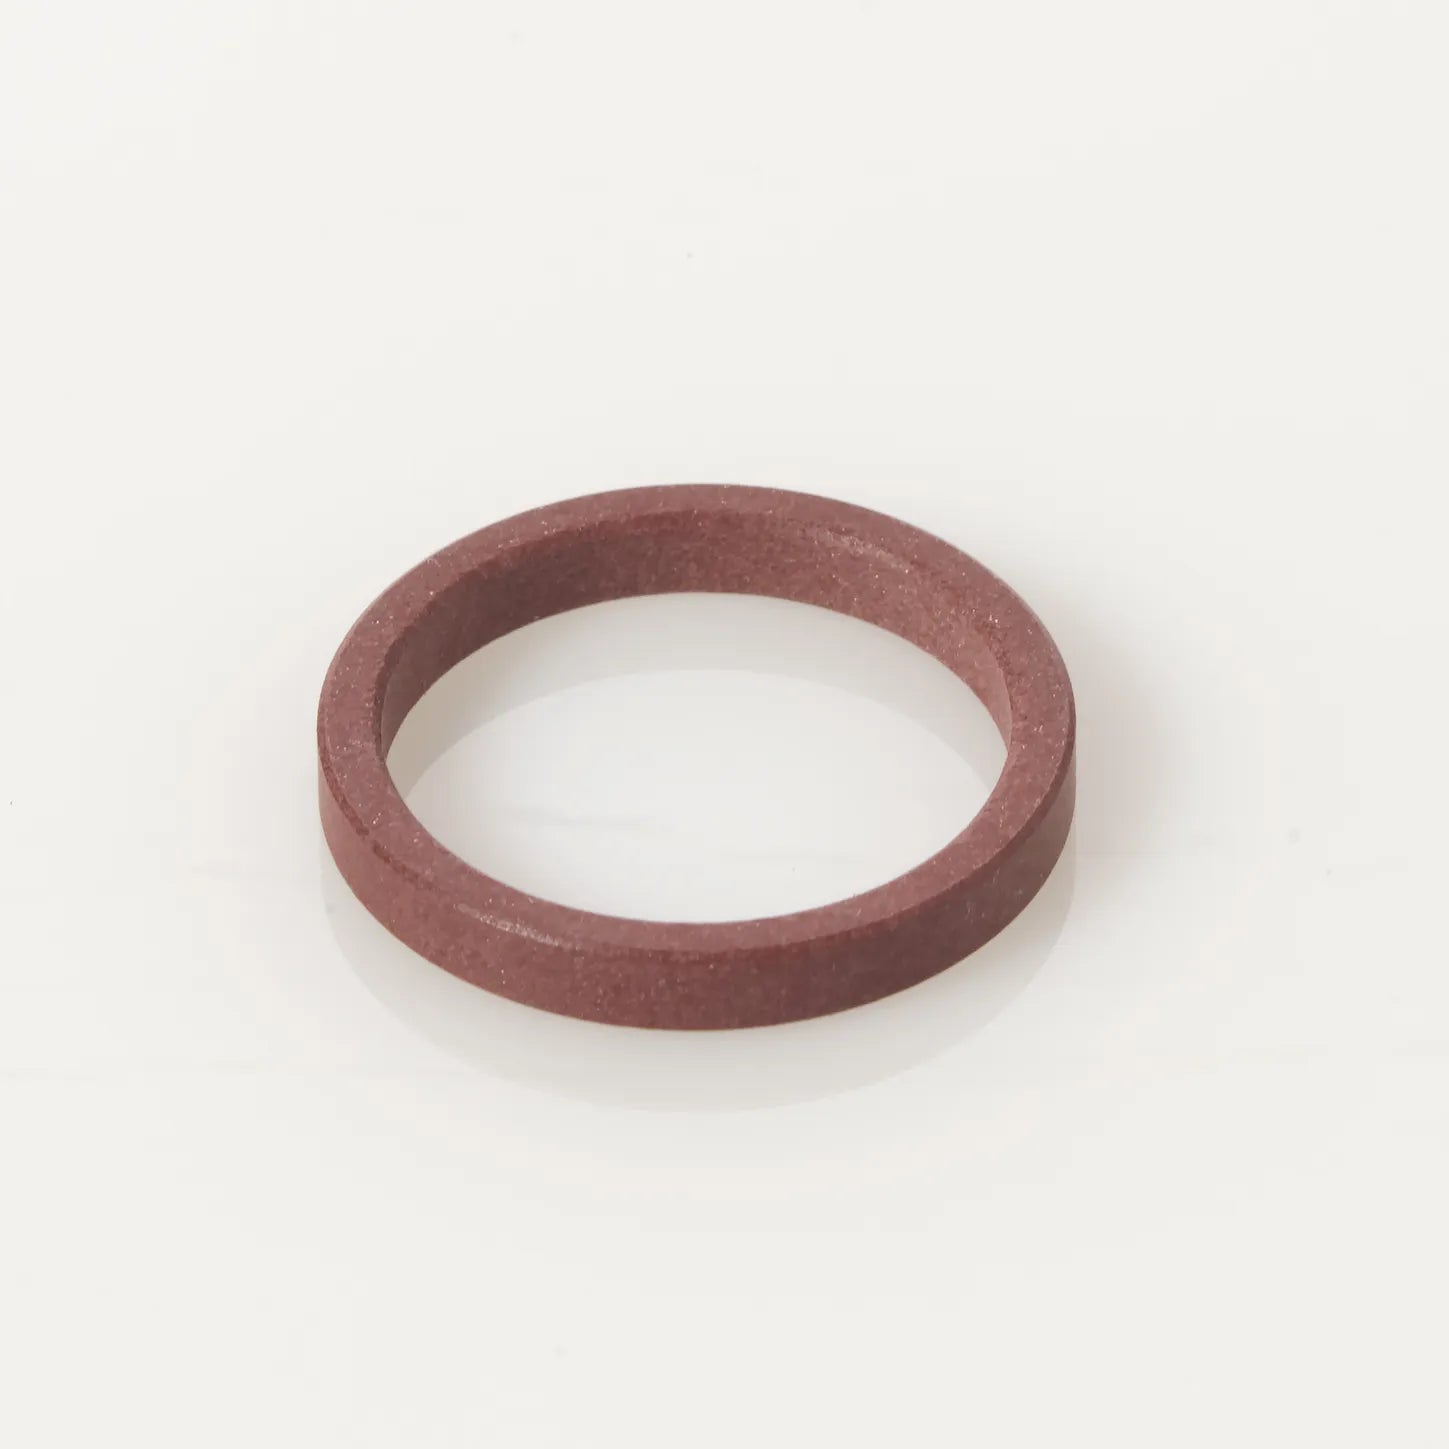 Bearing Ring, Comparable to Agilent # 1535-4045, 7010-006